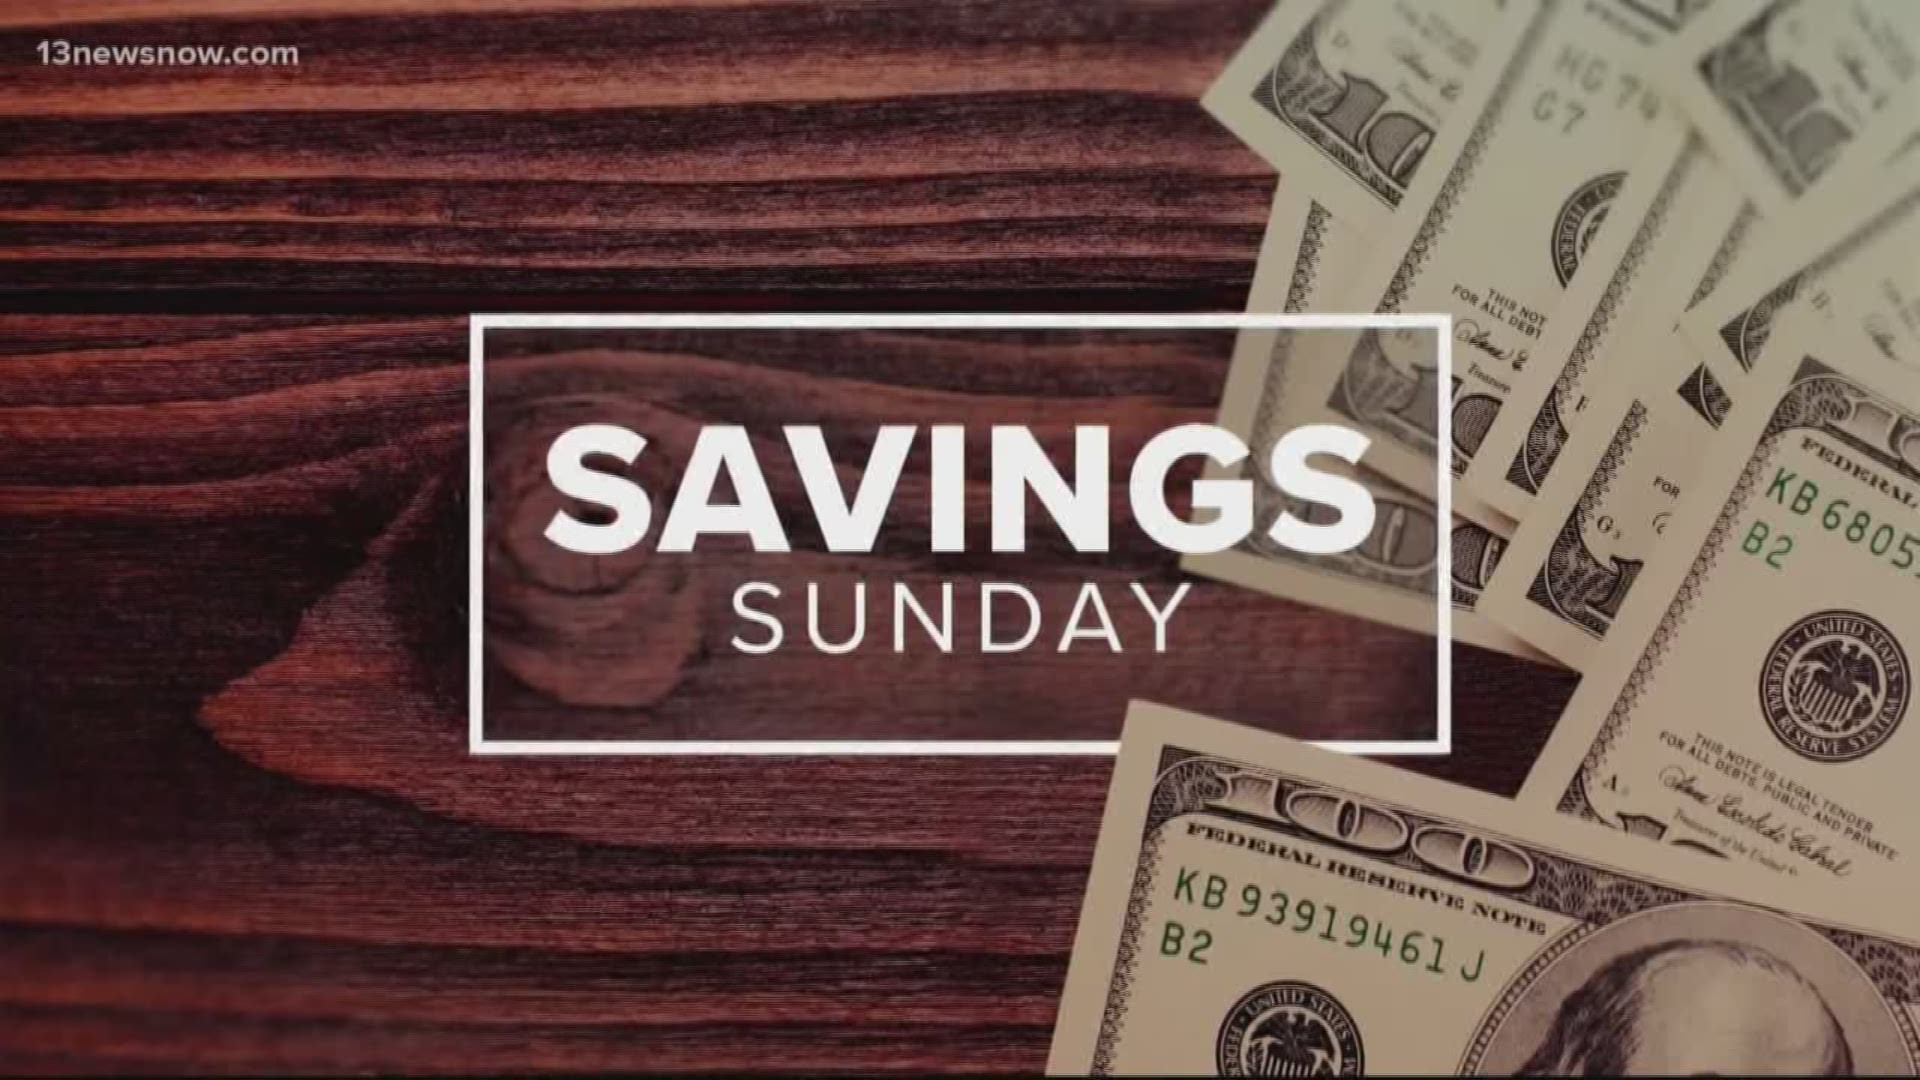 Laura Oliver from www.afrugalchick.com has your big savings for the week of July 14, 2019.